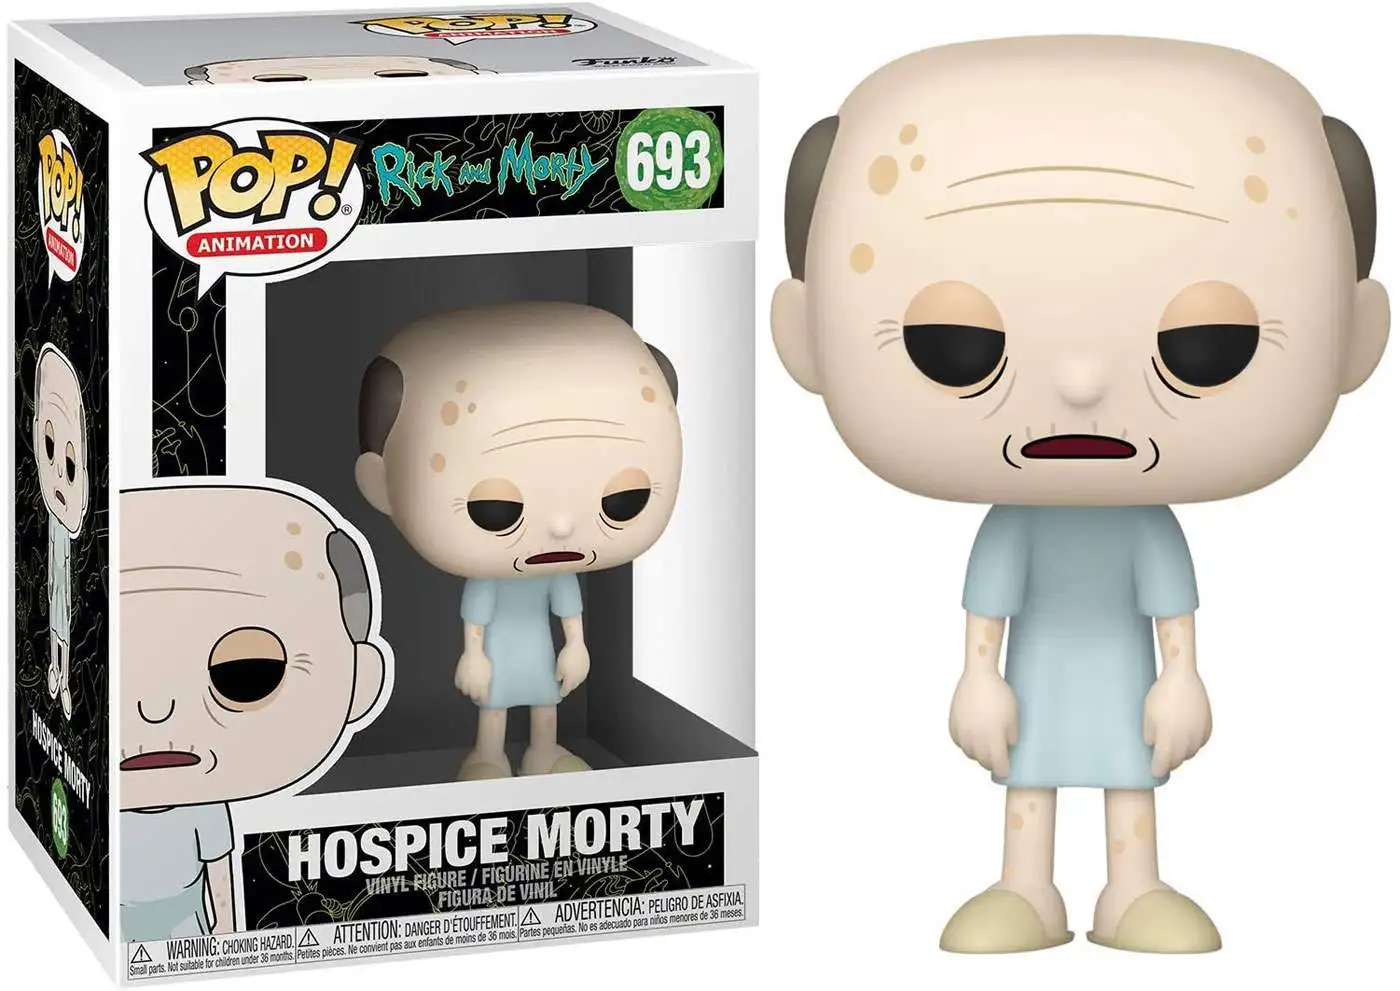 Space Suit Morty Action Figure for sale online Rick and Morty Animation Funko Pop 